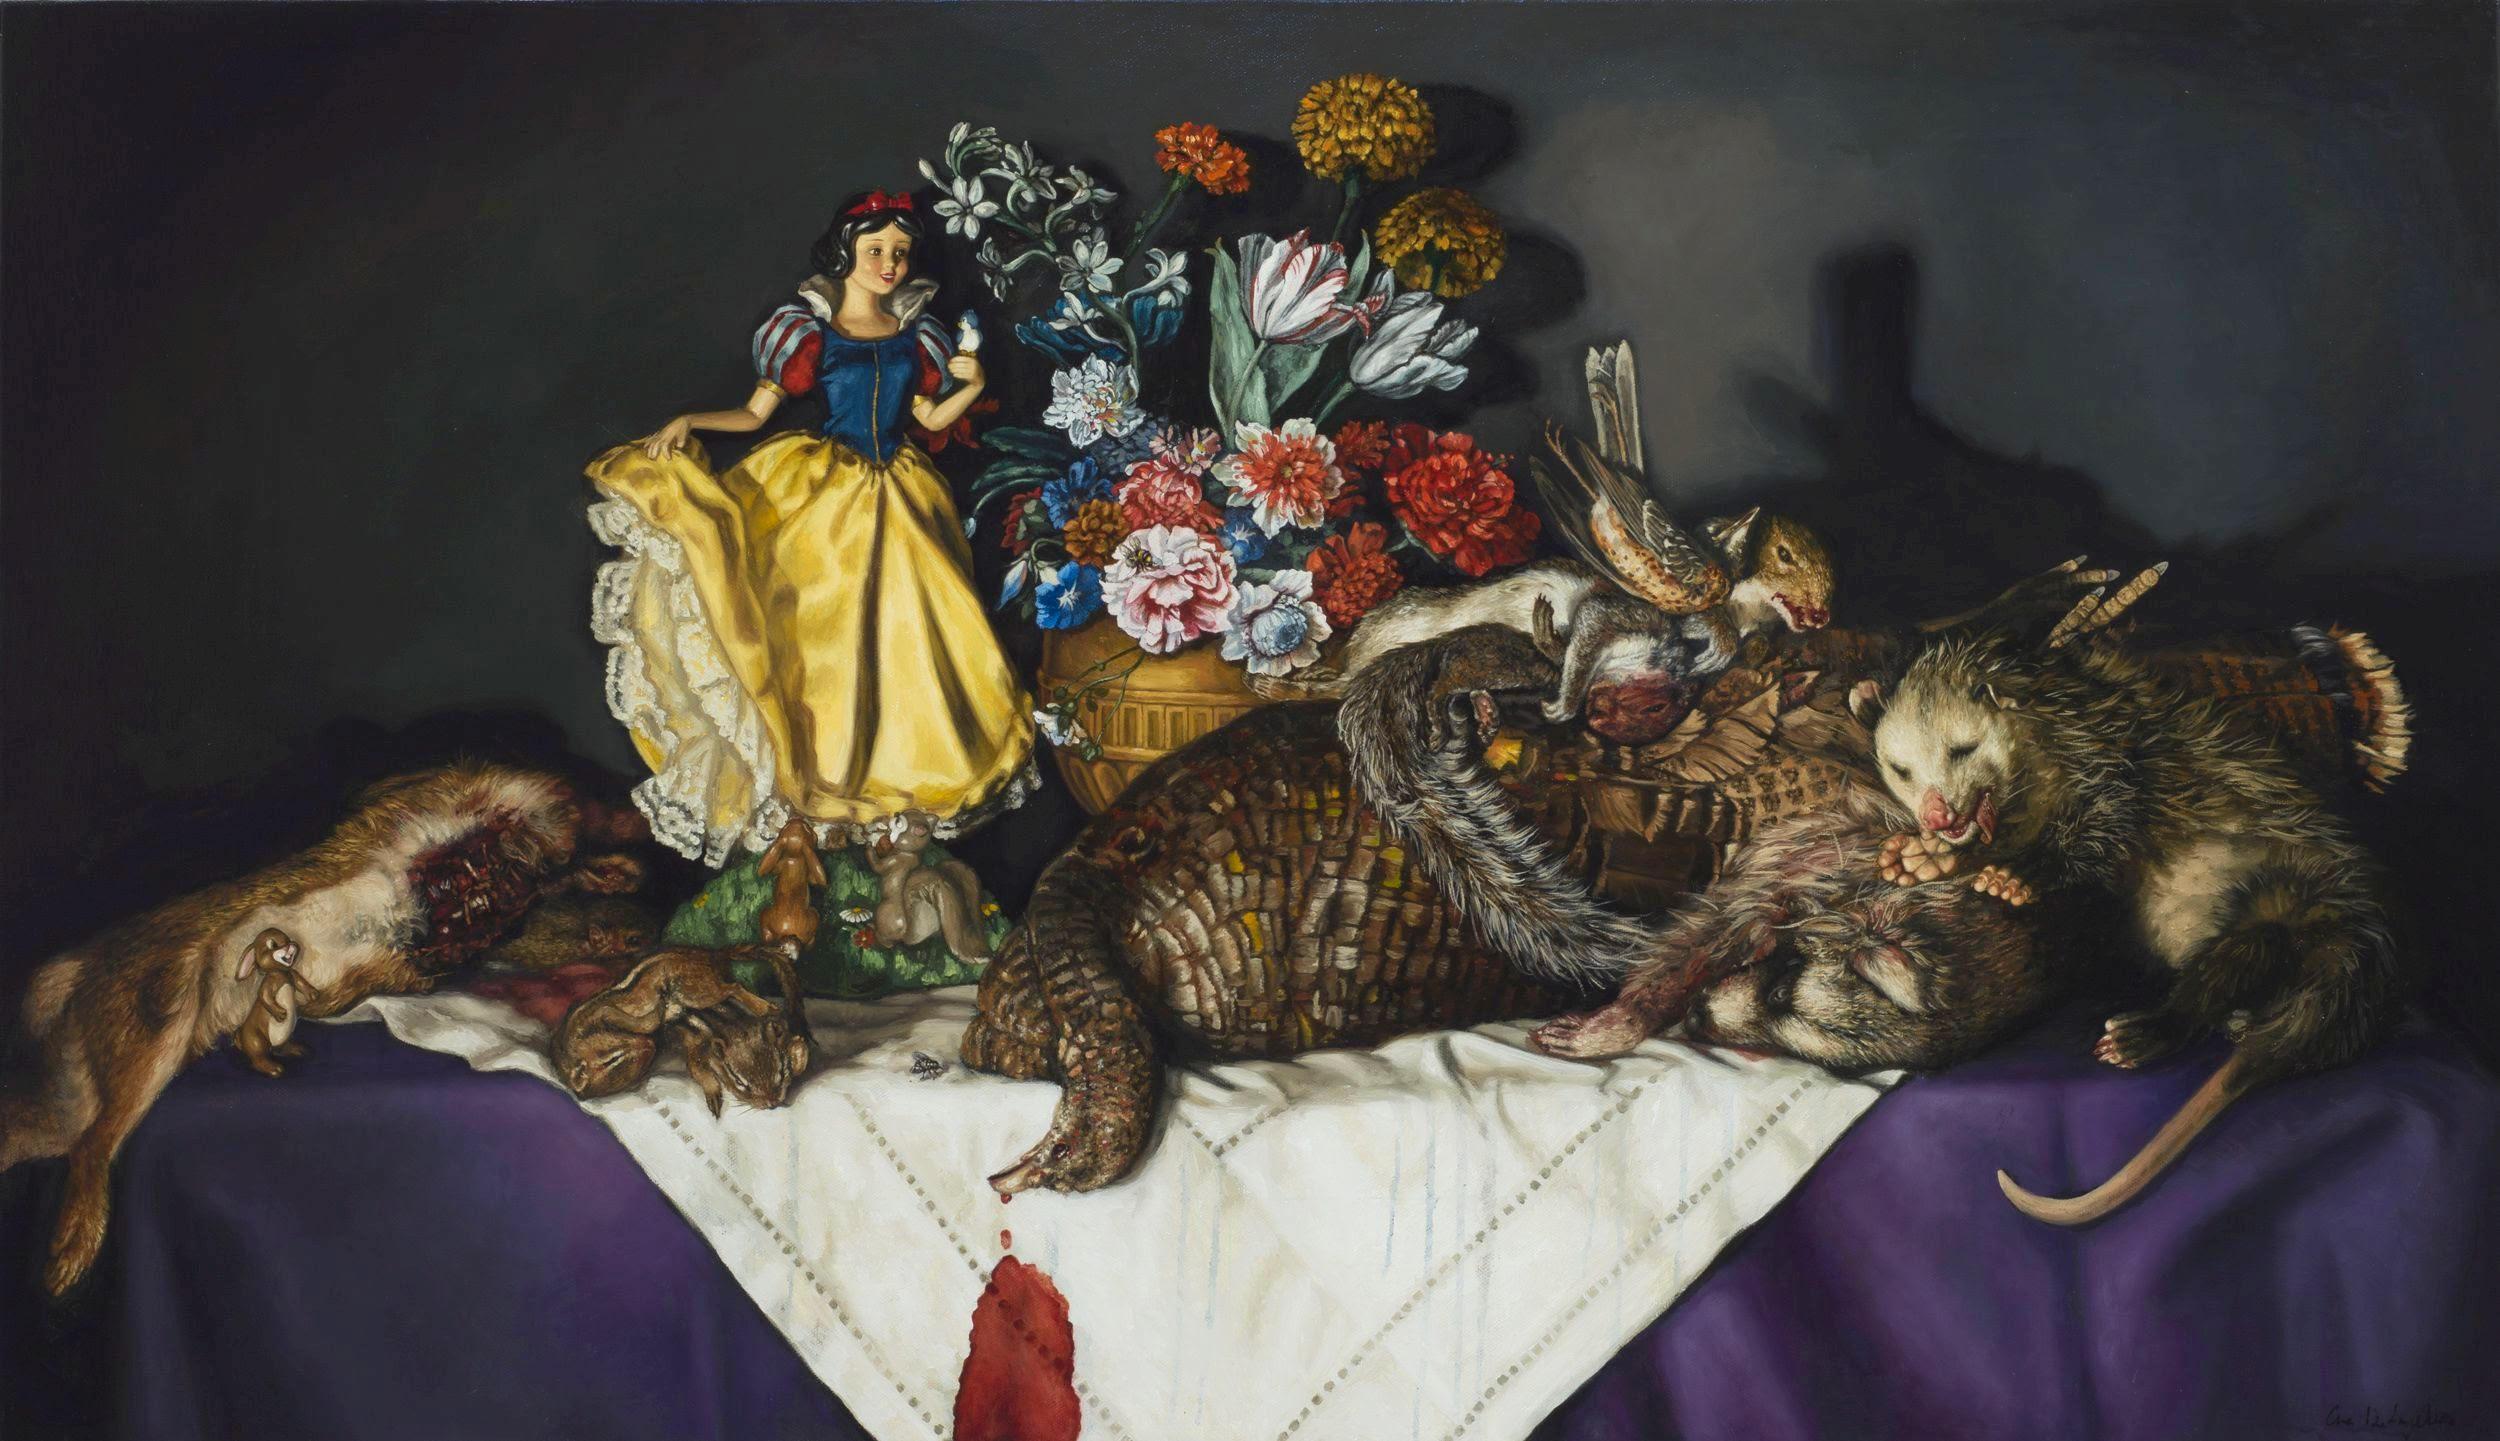 Cara DeAngelis Still-Life Painting - CARA DEANGELIS, "Snow White w Laid Table of Road Kill" realist oil still life